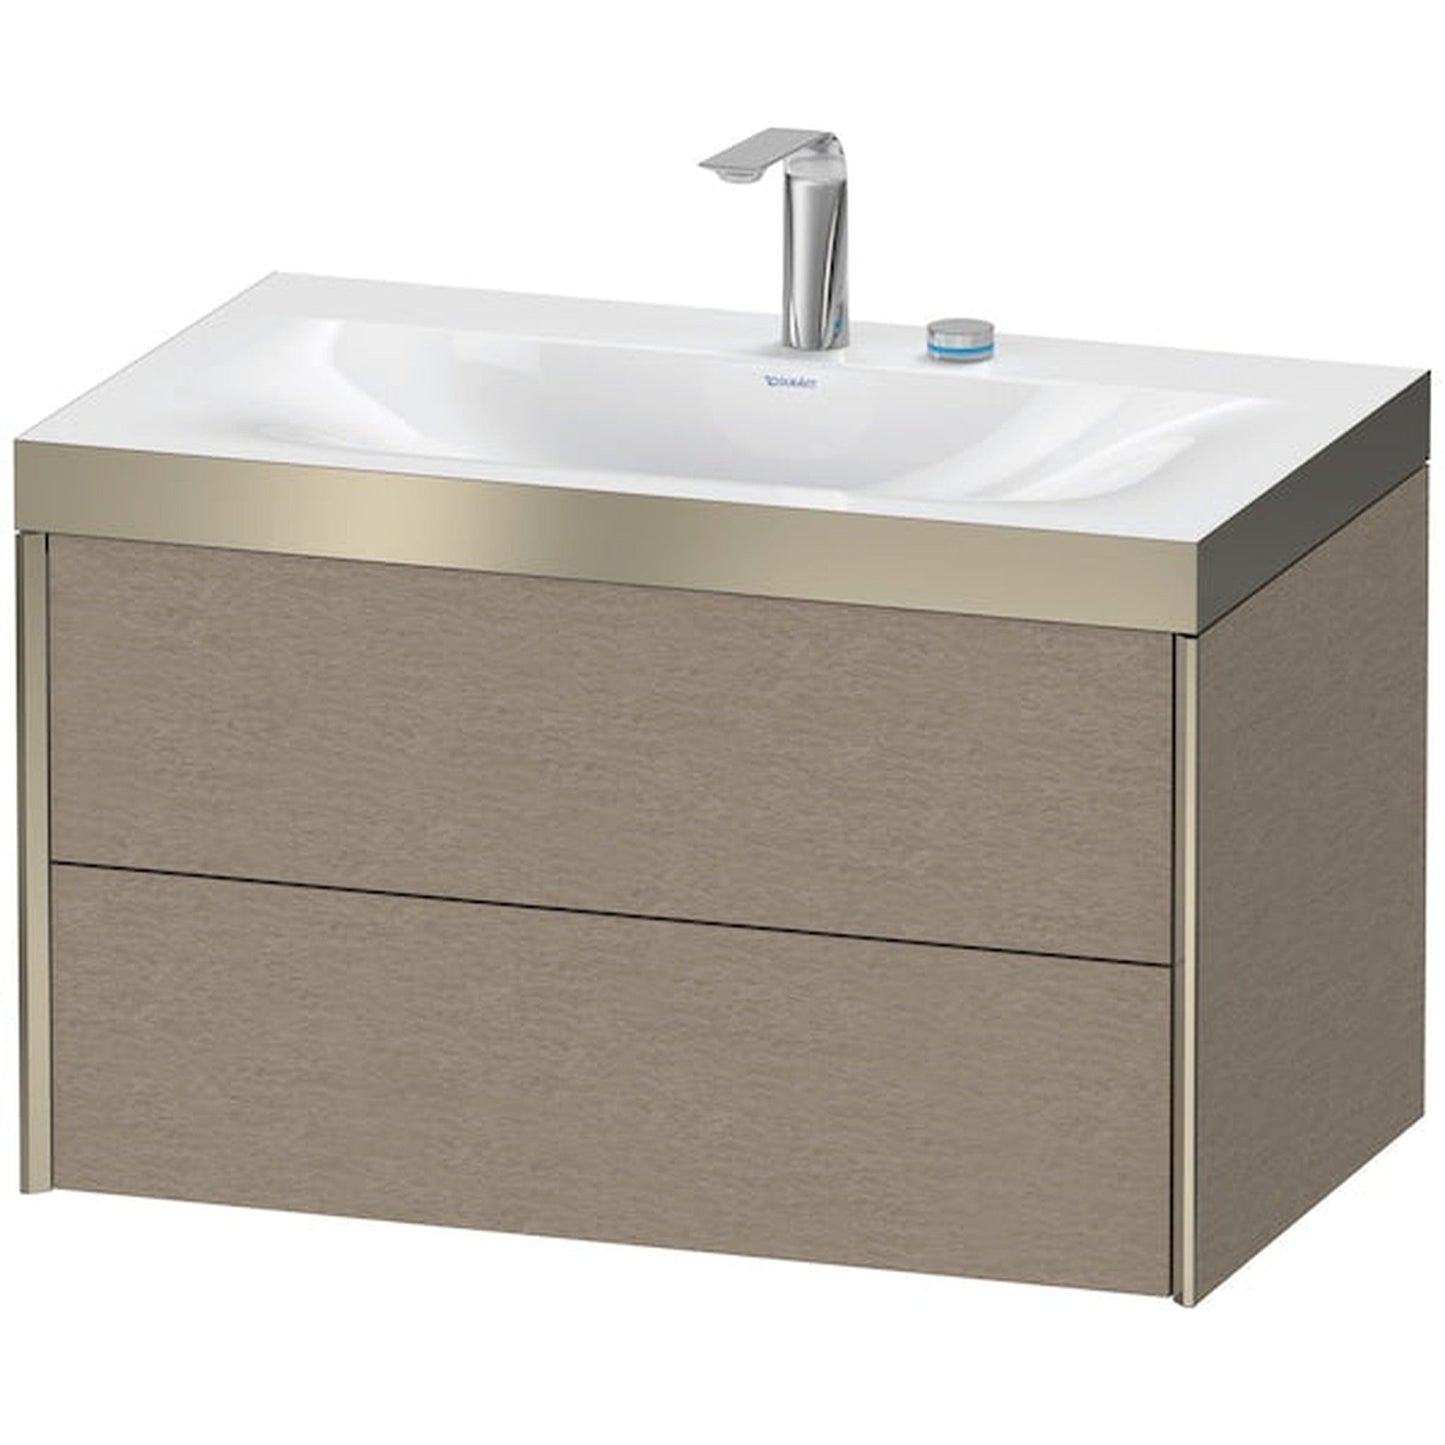 Duravit Xviu 31" x 20" x 19" Two Drawer C-Bonded Wall-Mount Vanity Kit With Two Tap Holes, Cashmere Oak (XV4615EB111P)